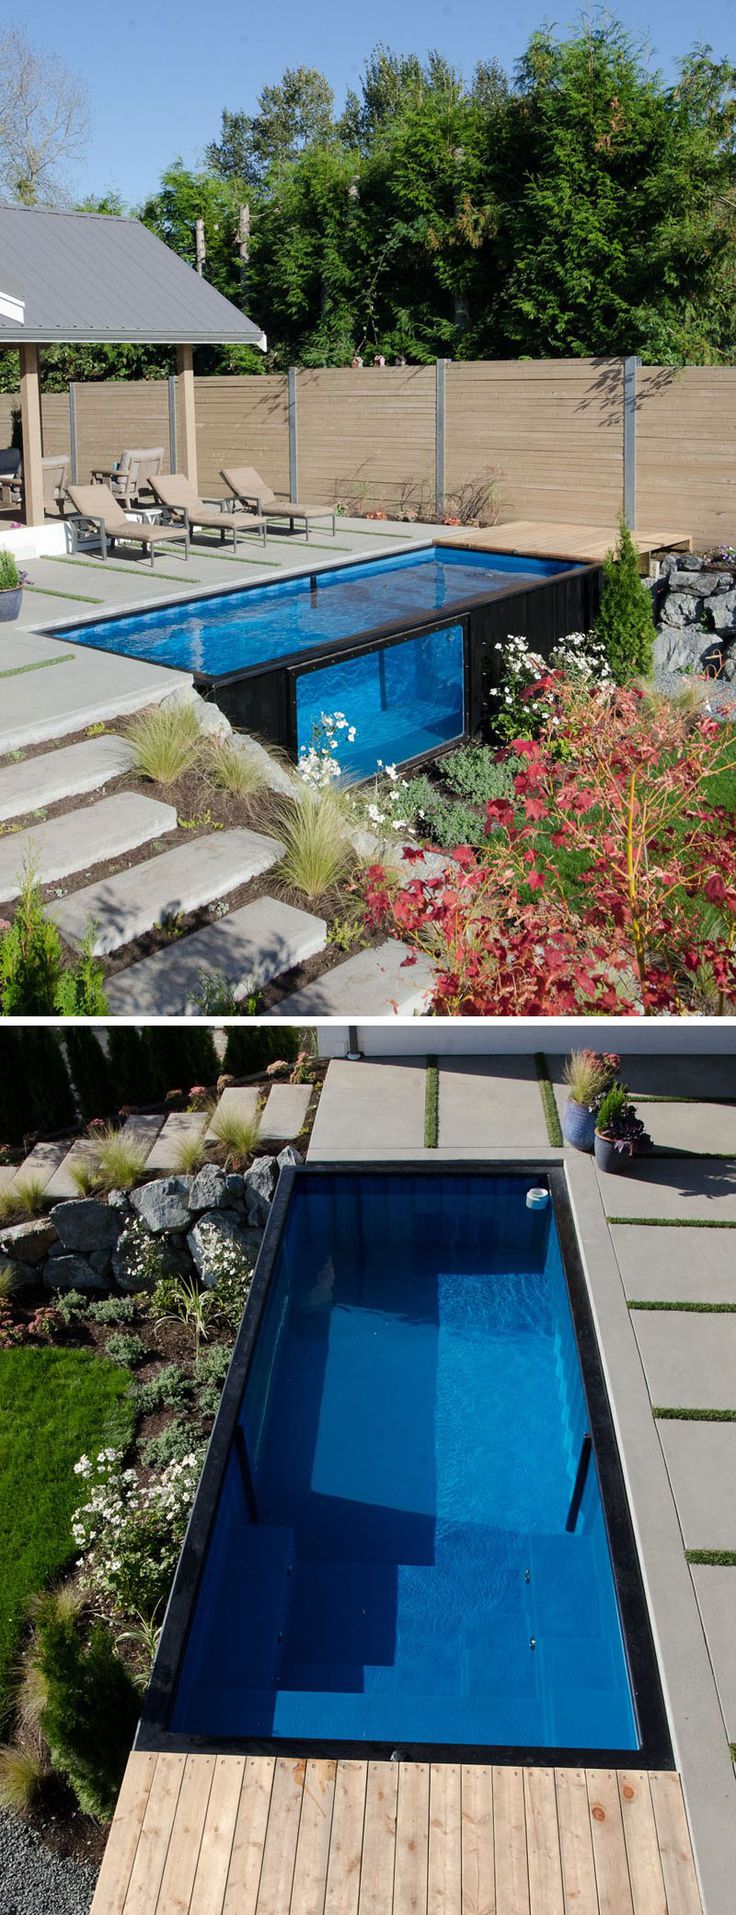 Modpools have transformed shipping containers into modern swimming pools with a ...